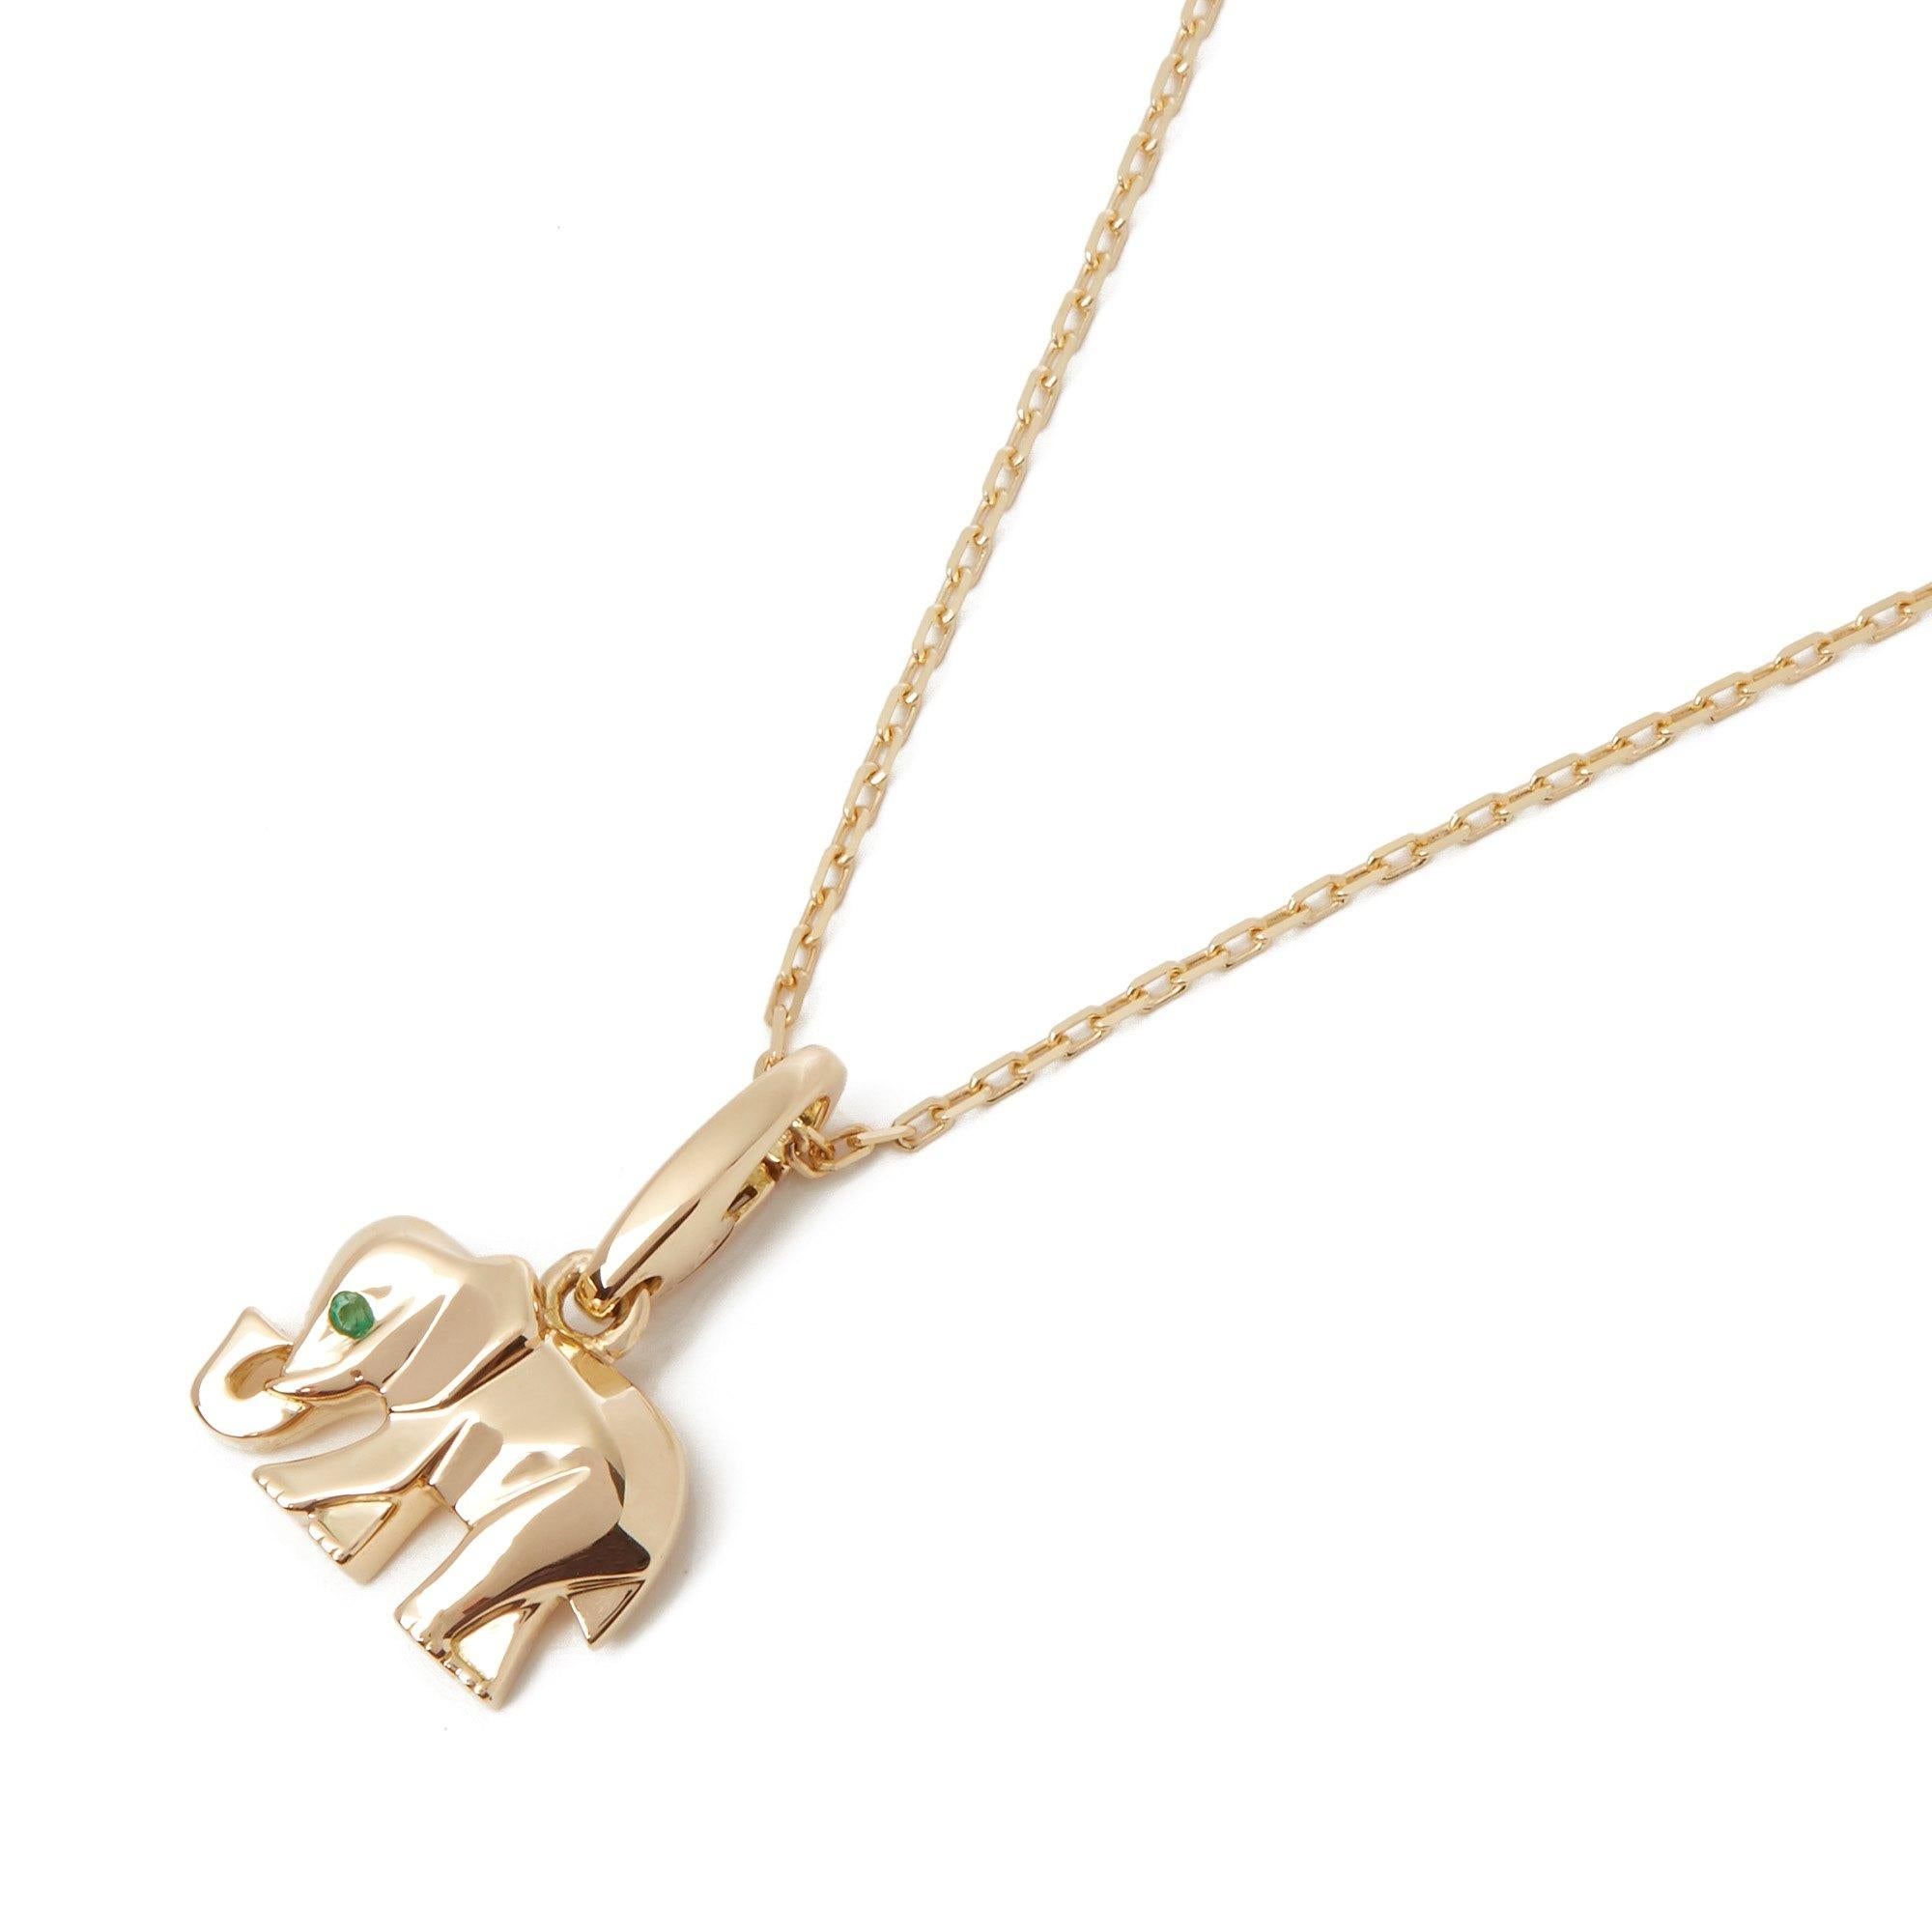 This Elephant Pendant by Cartier features One Emerald Mounted in 18k Yellow Gold. Complete with Xupes Presentation Box. Our Xupes reference is COMJ233 should you need to quote this.

